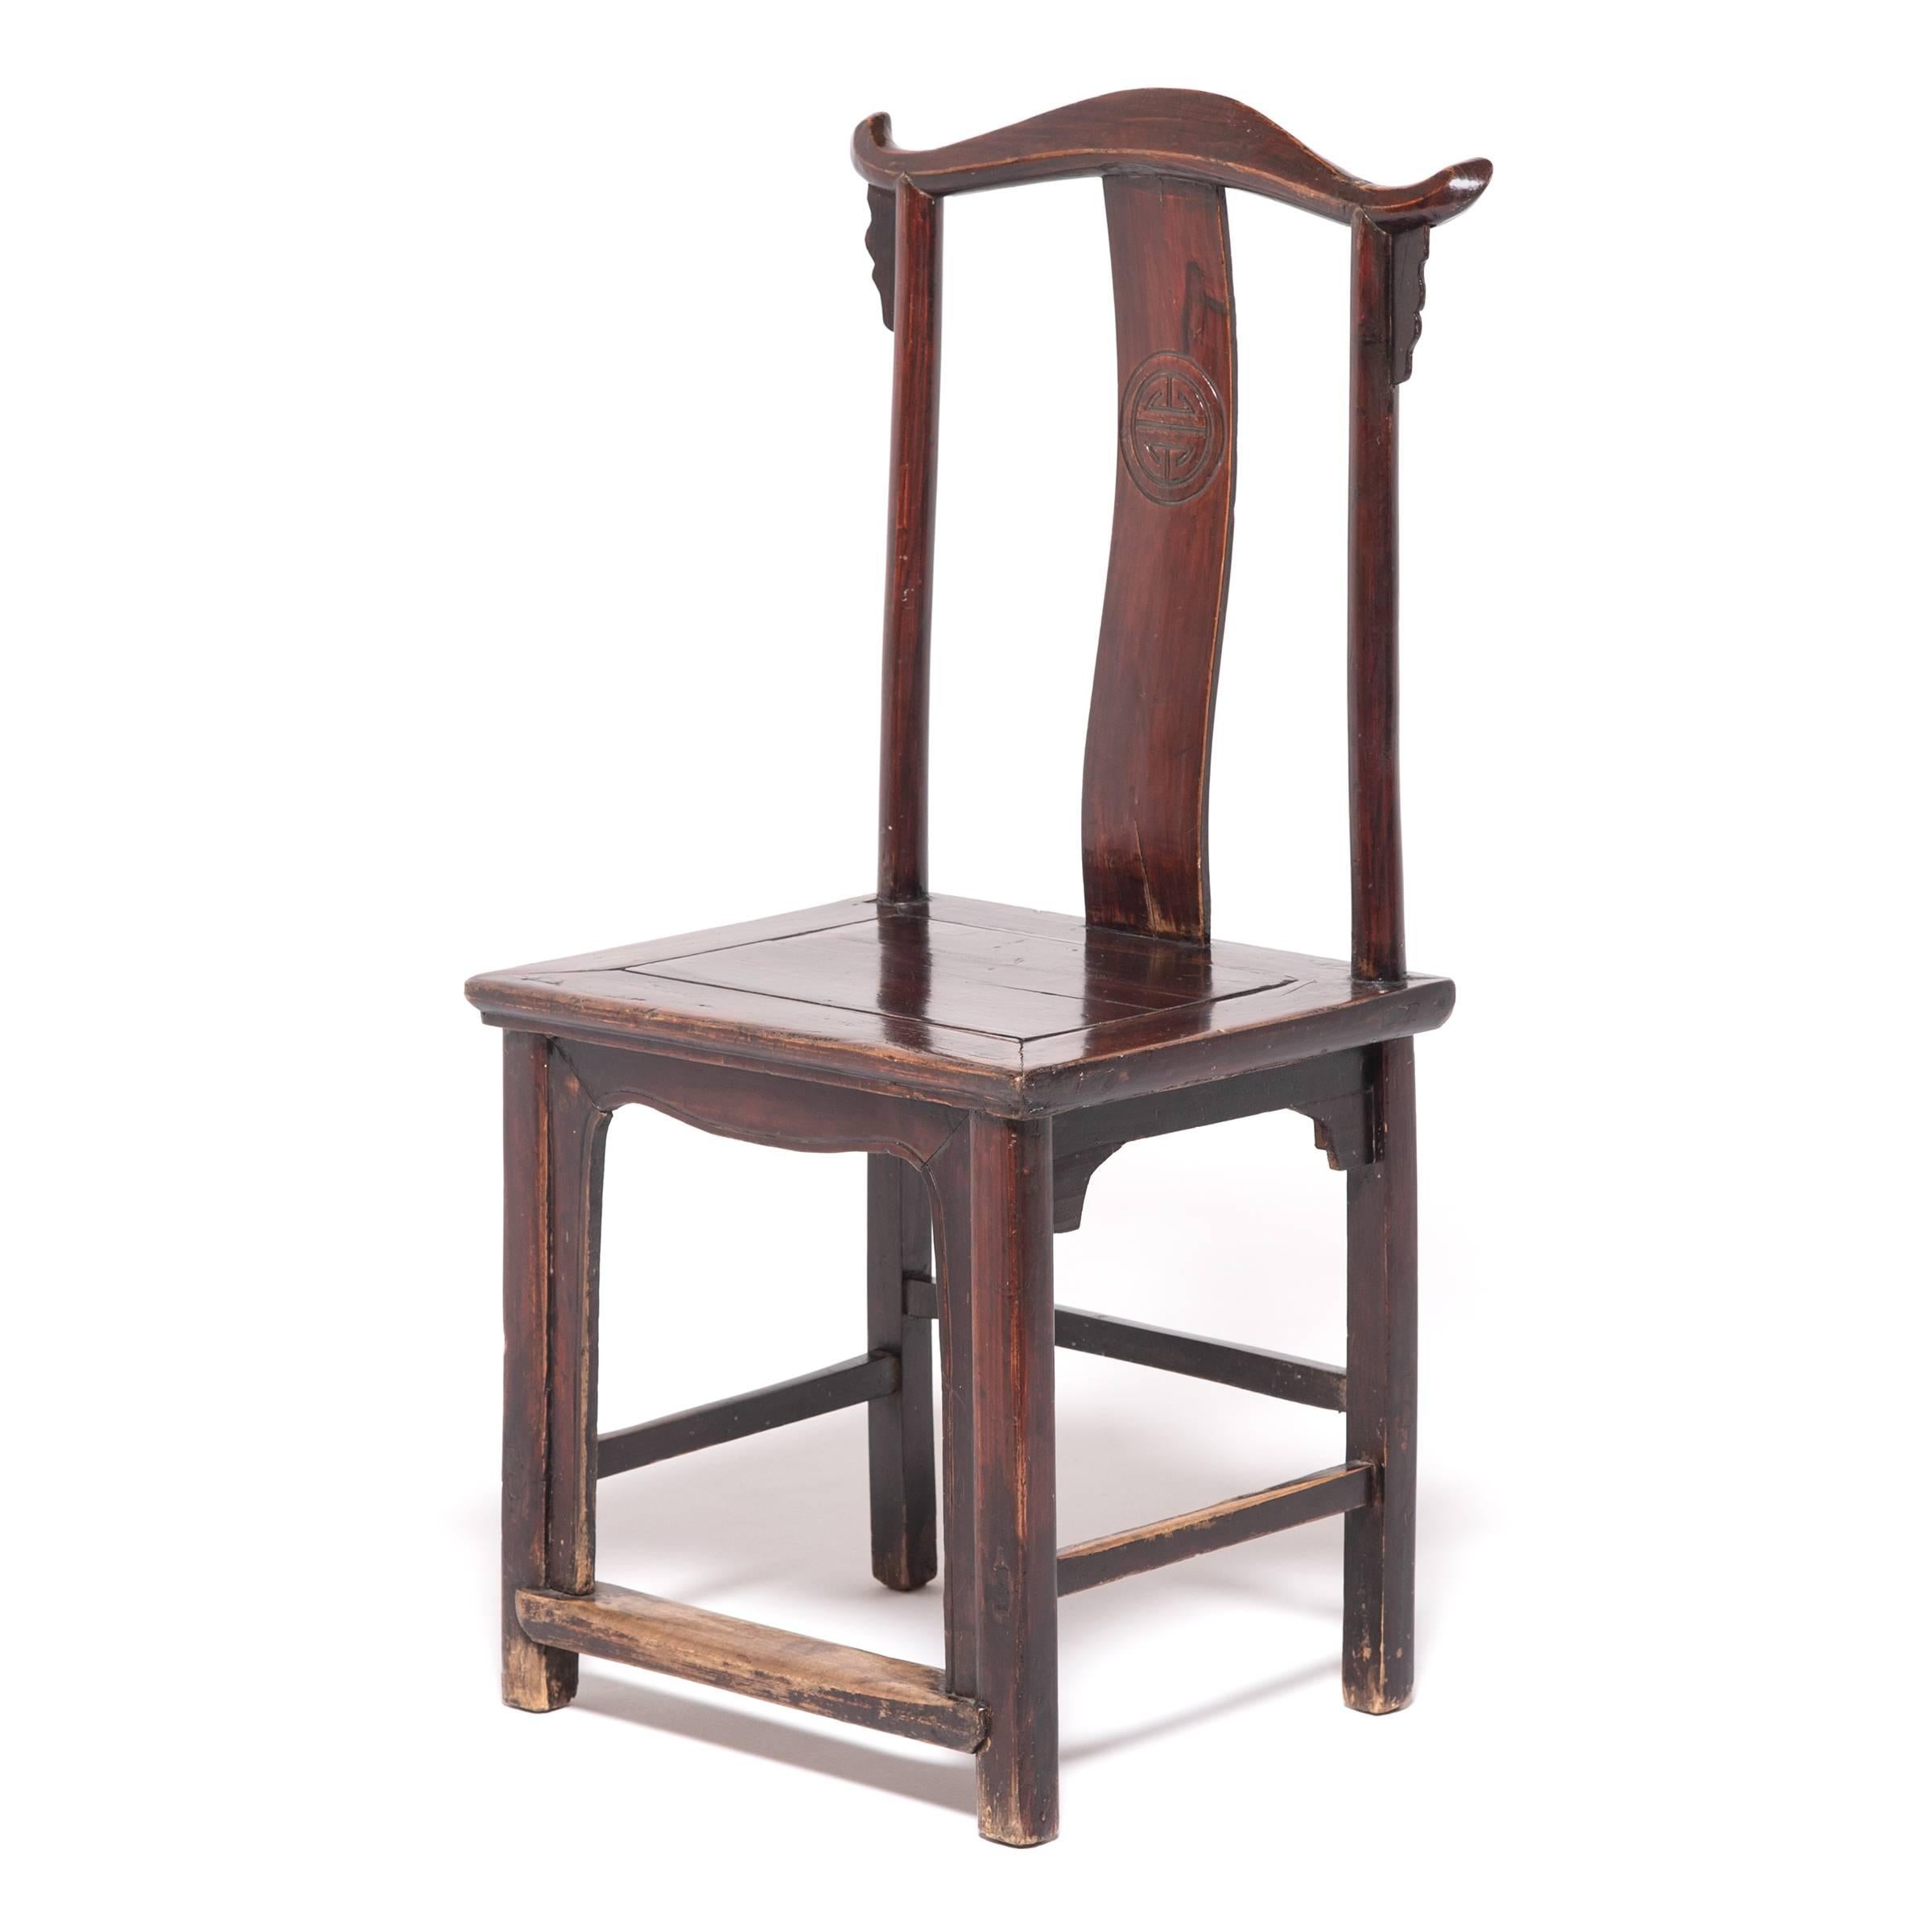 Rooted in ancient imperial courts and reinvigorated during the Ming dynasty, the emperor chair is also known as an “official’s hat chair” for the shape of the sculpted crest rail that resembles a winged hat. Crafted with dynamic lines and subtle